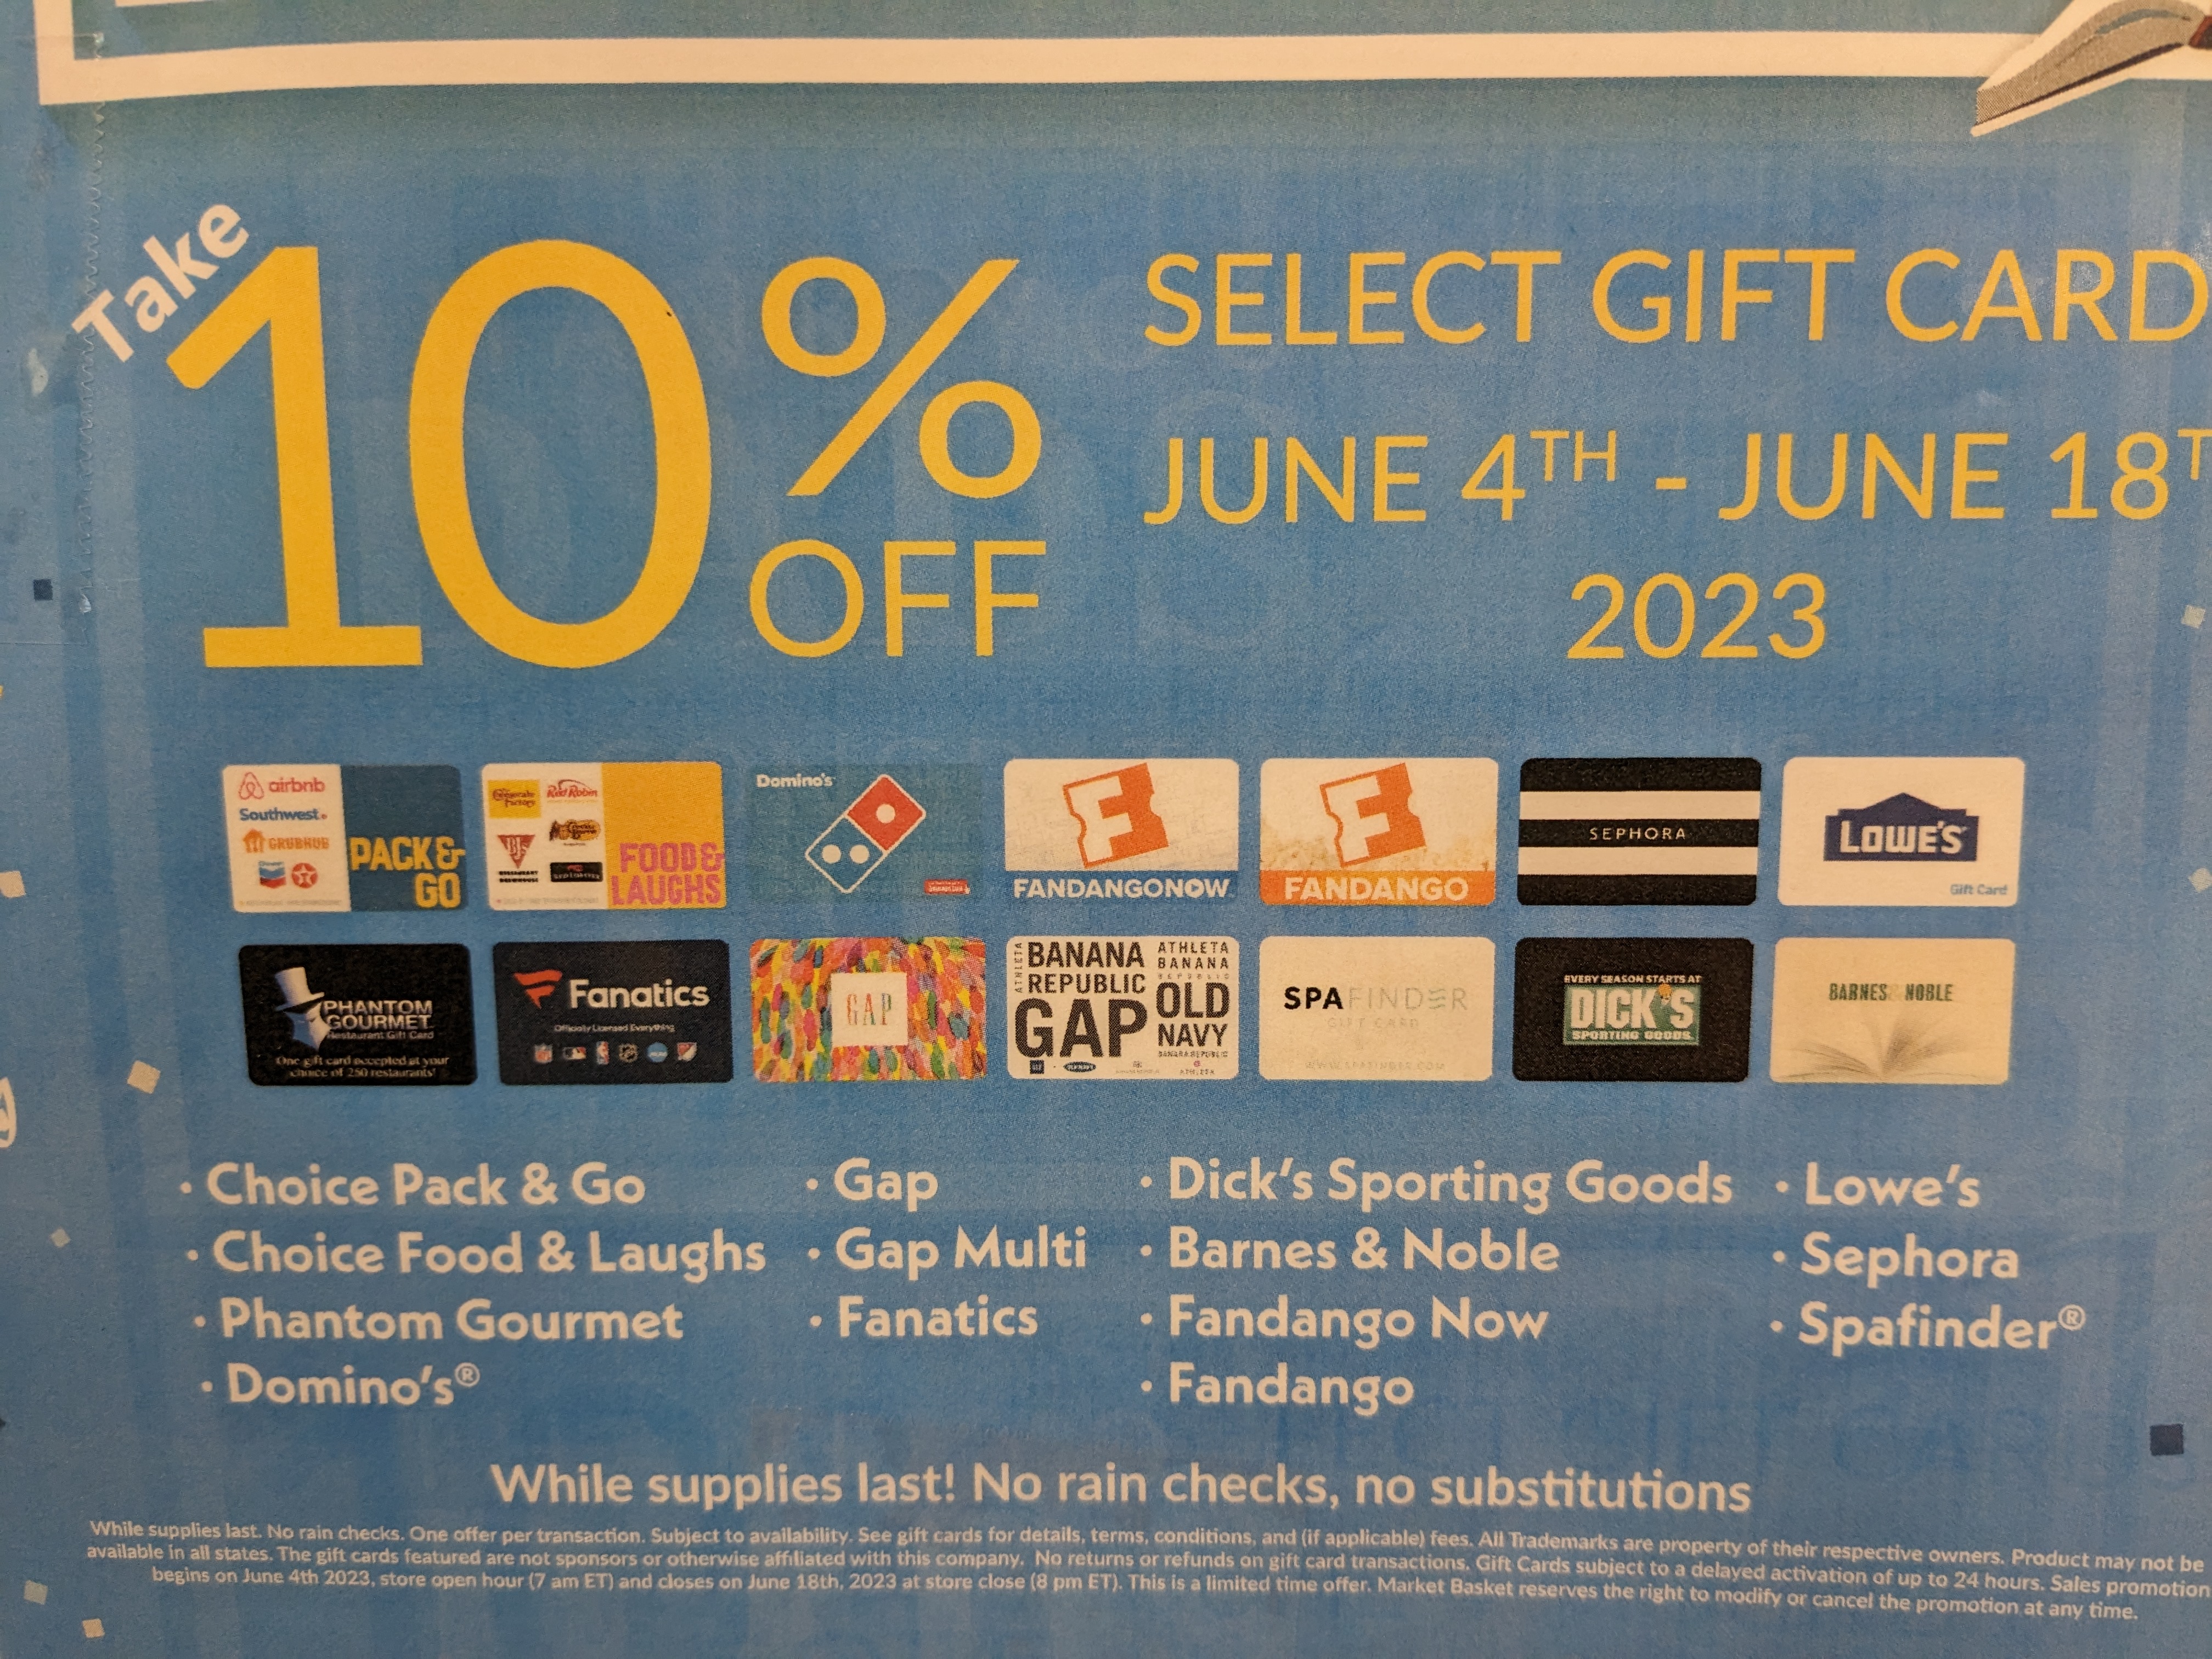 MA, NH, ME, RI Market Basket 10% off select gift cards includes lowes